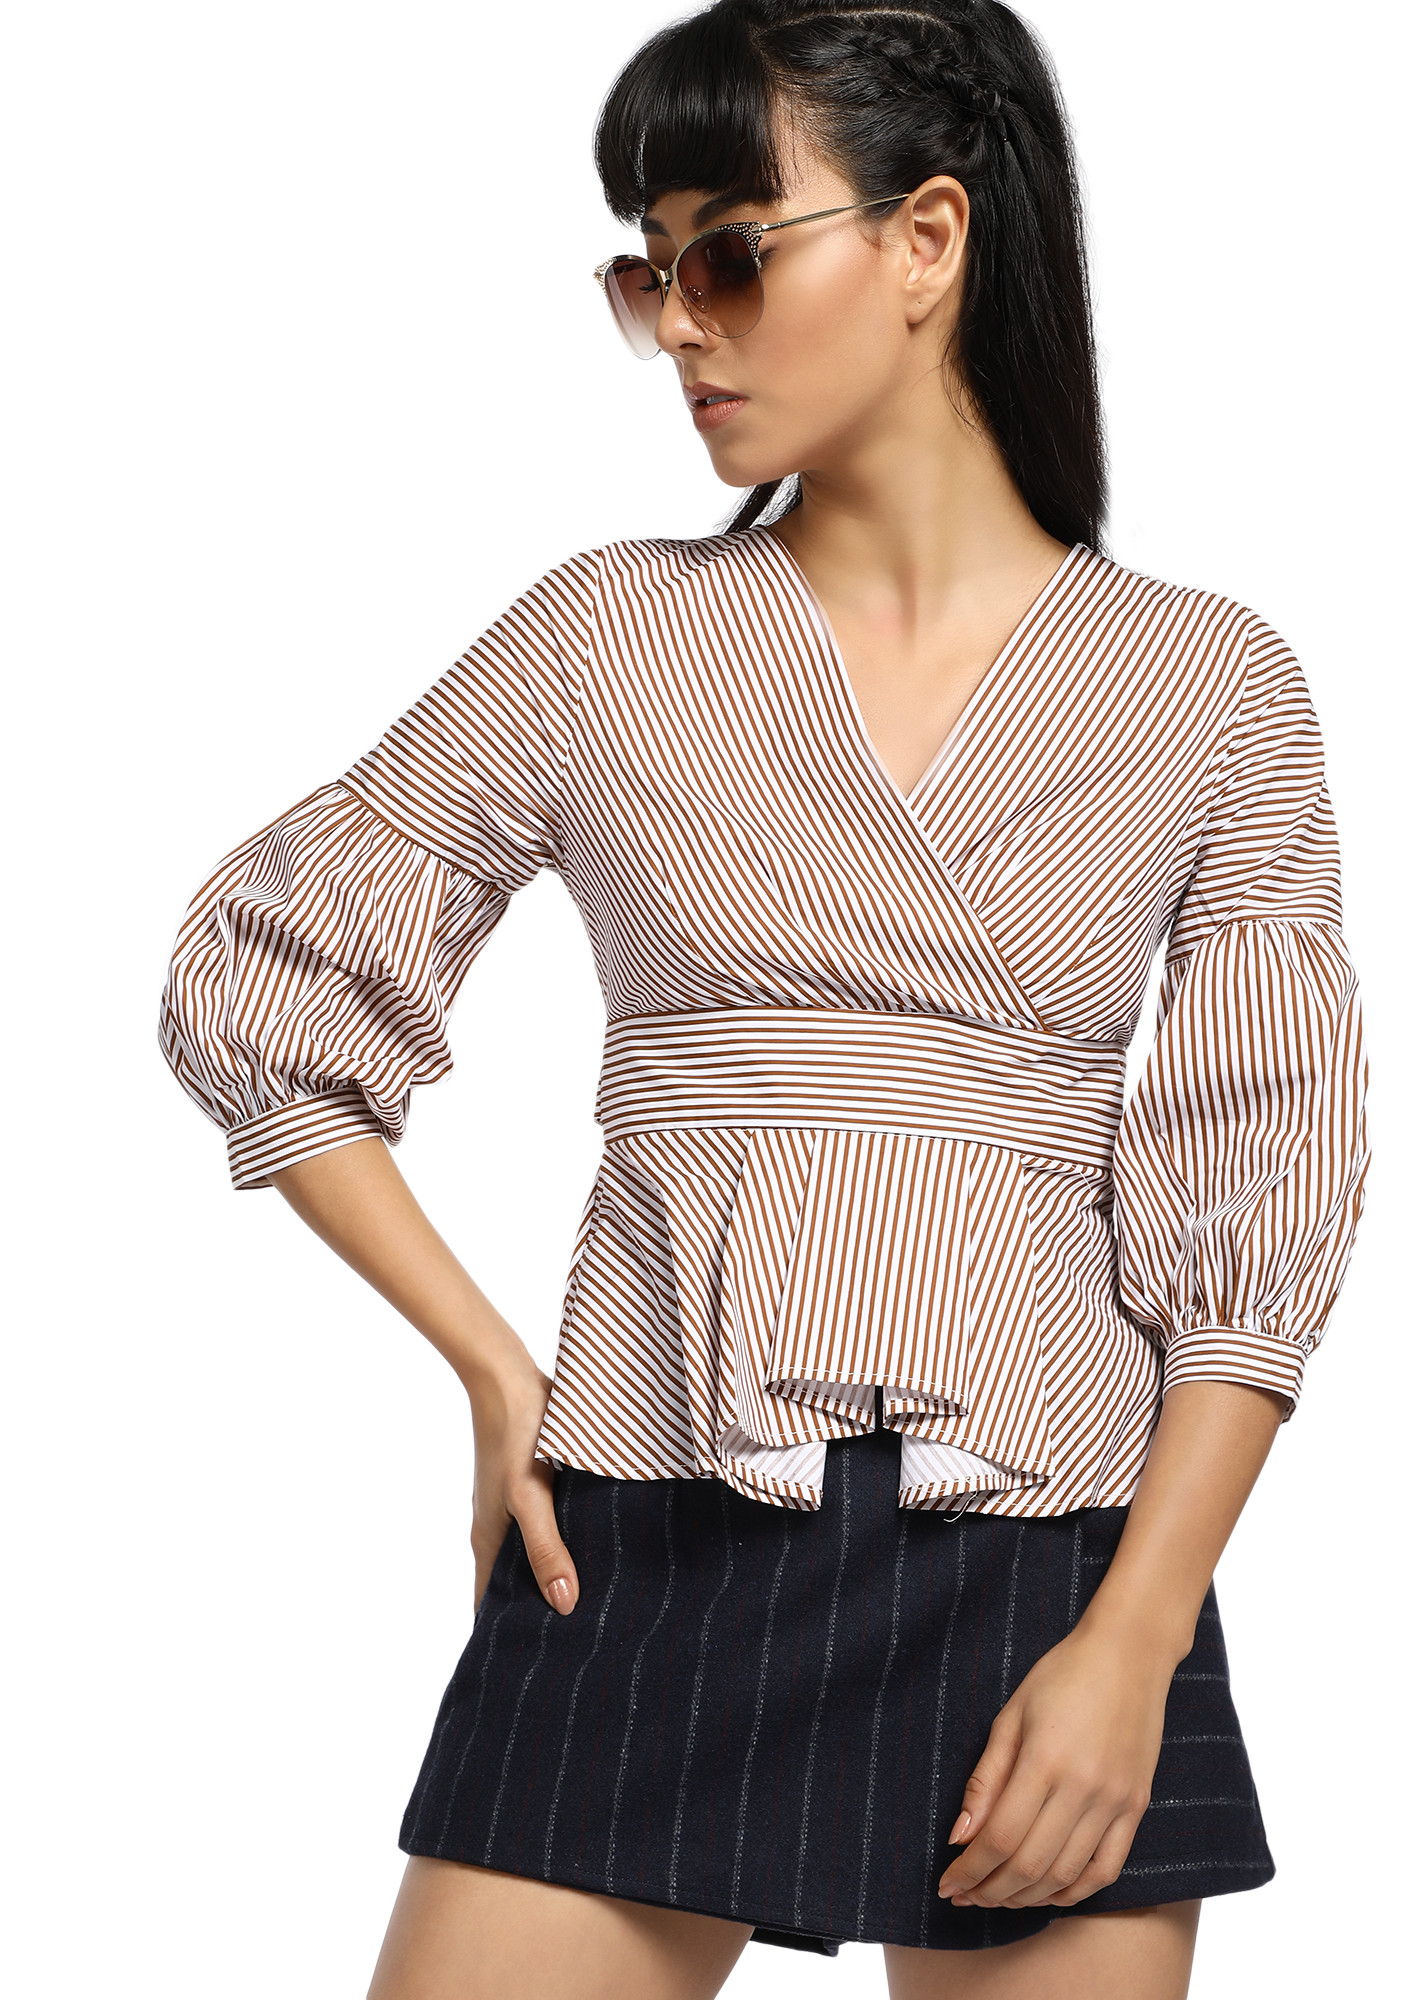 HATE LATE-COMERS BROWN STRIPED PEPLUM BLOUSE